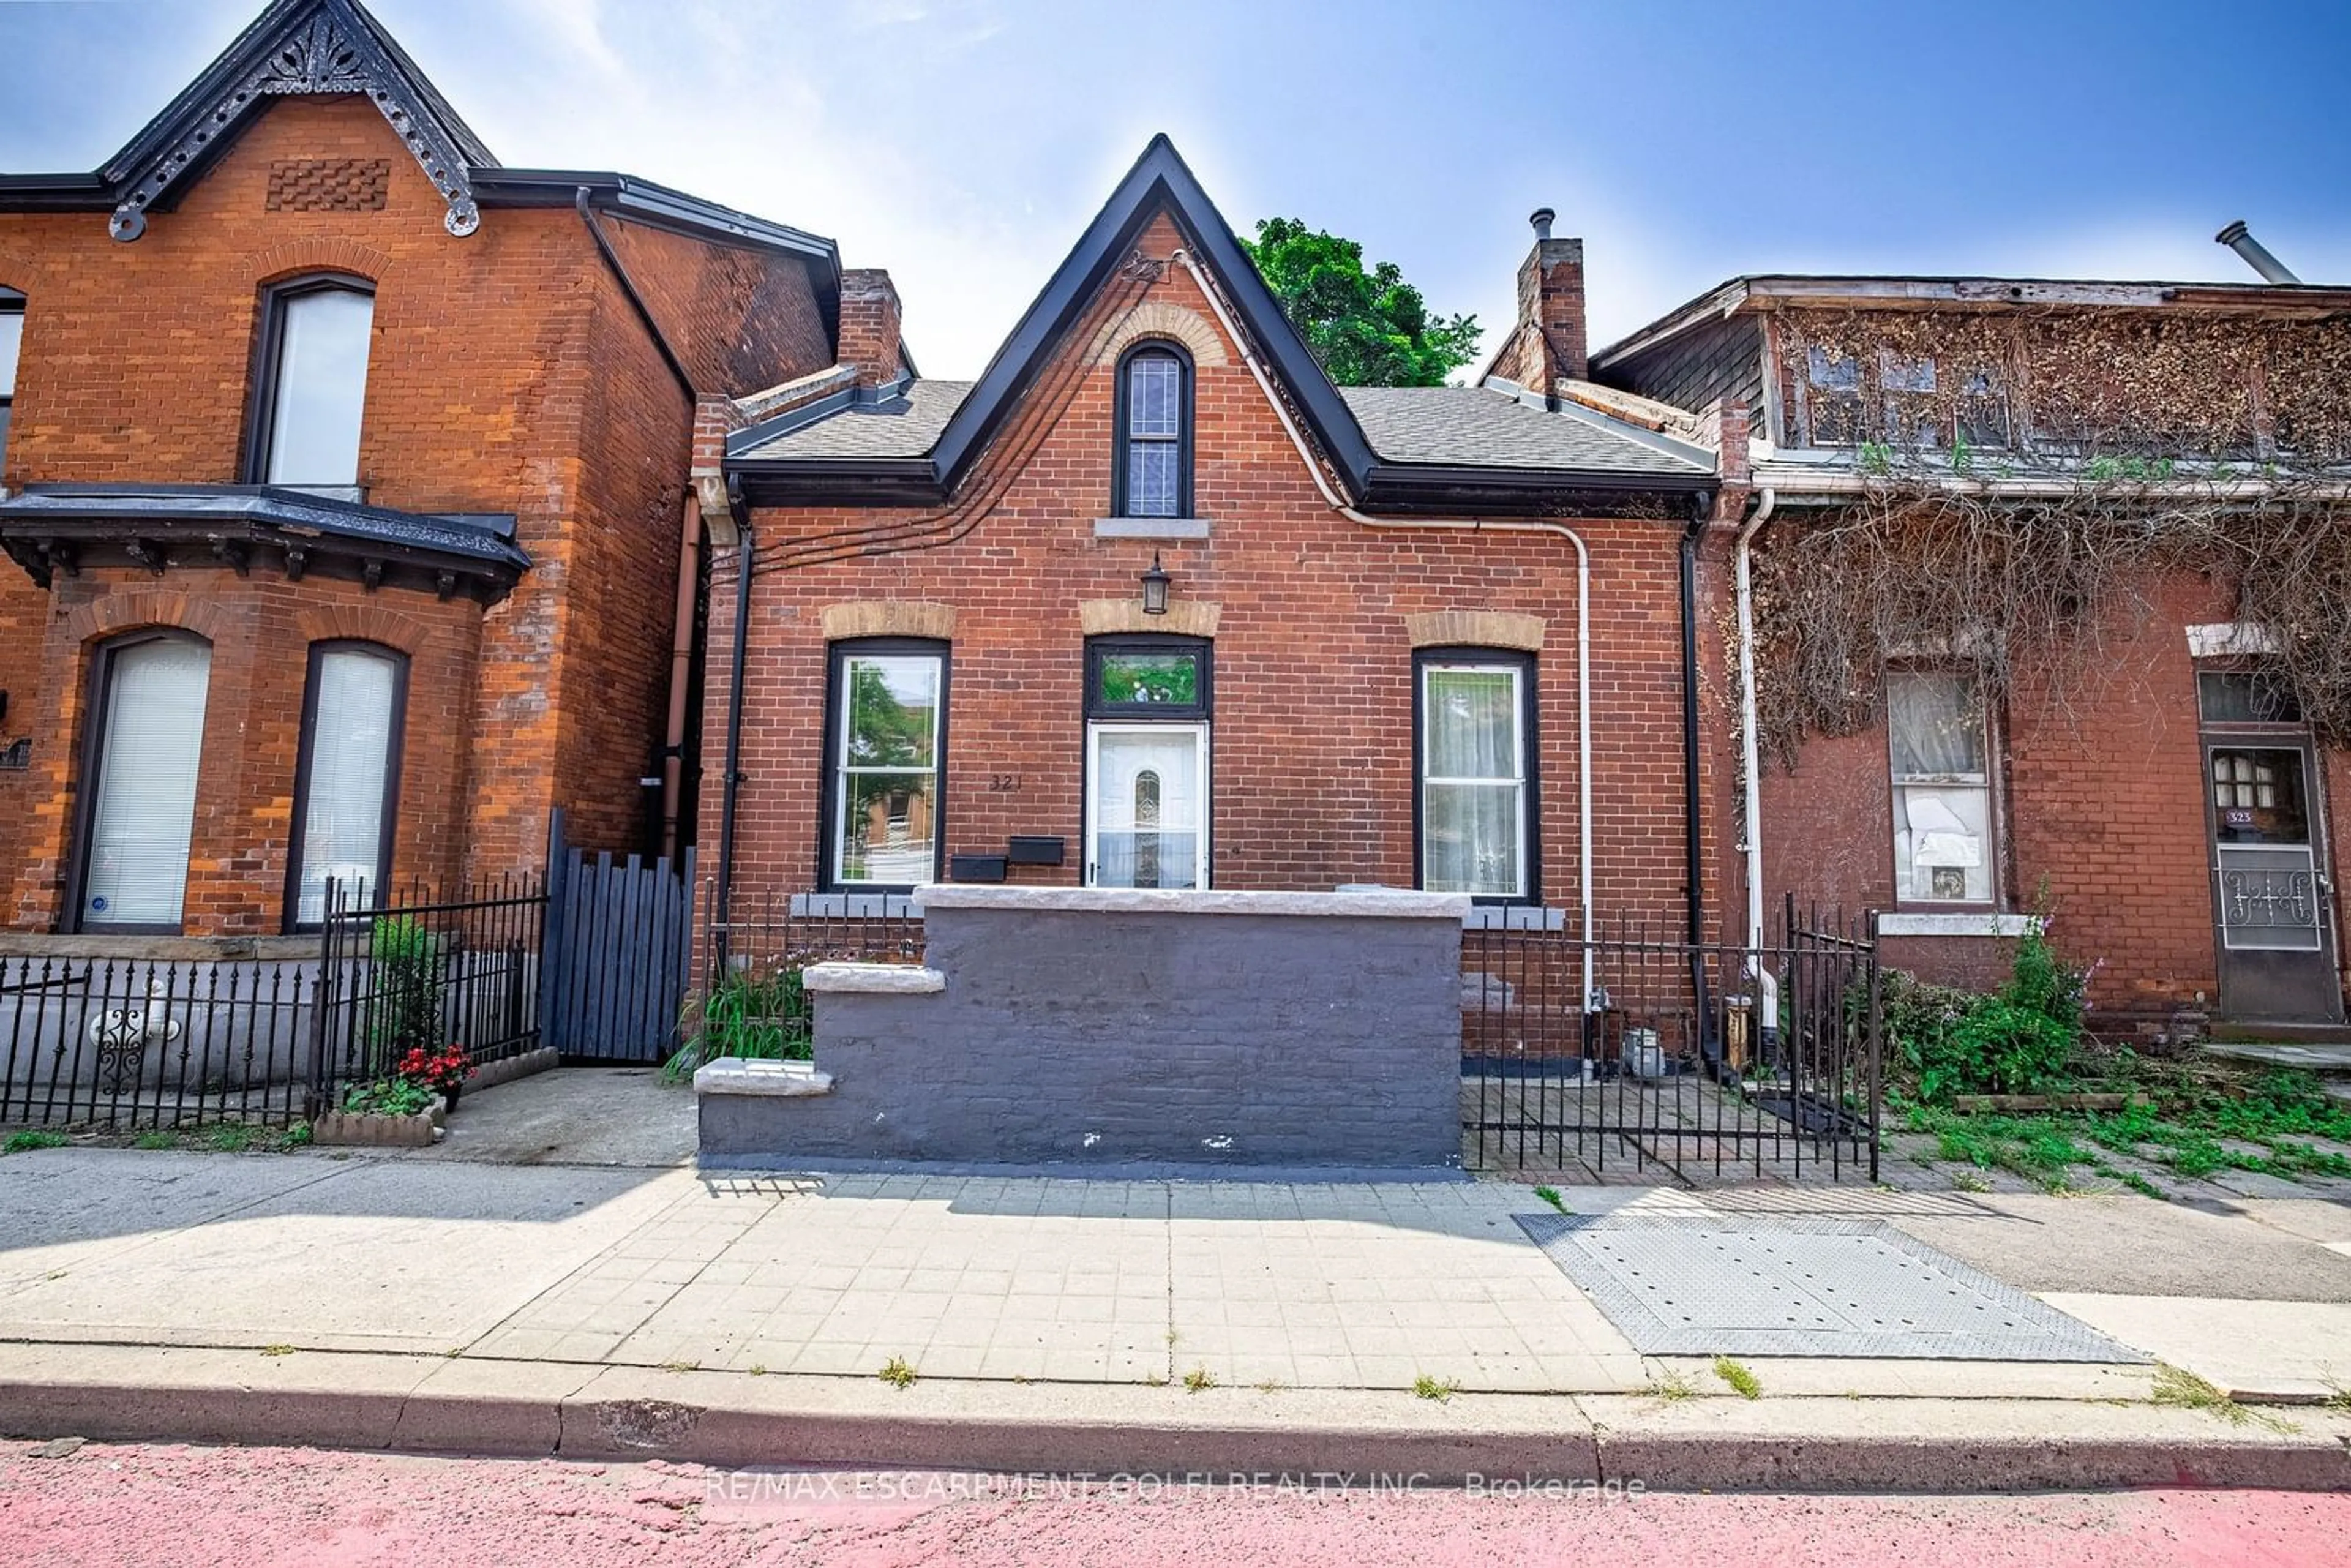 Home with brick exterior material for 321 Main St, Hamilton Ontario L8P 1K1